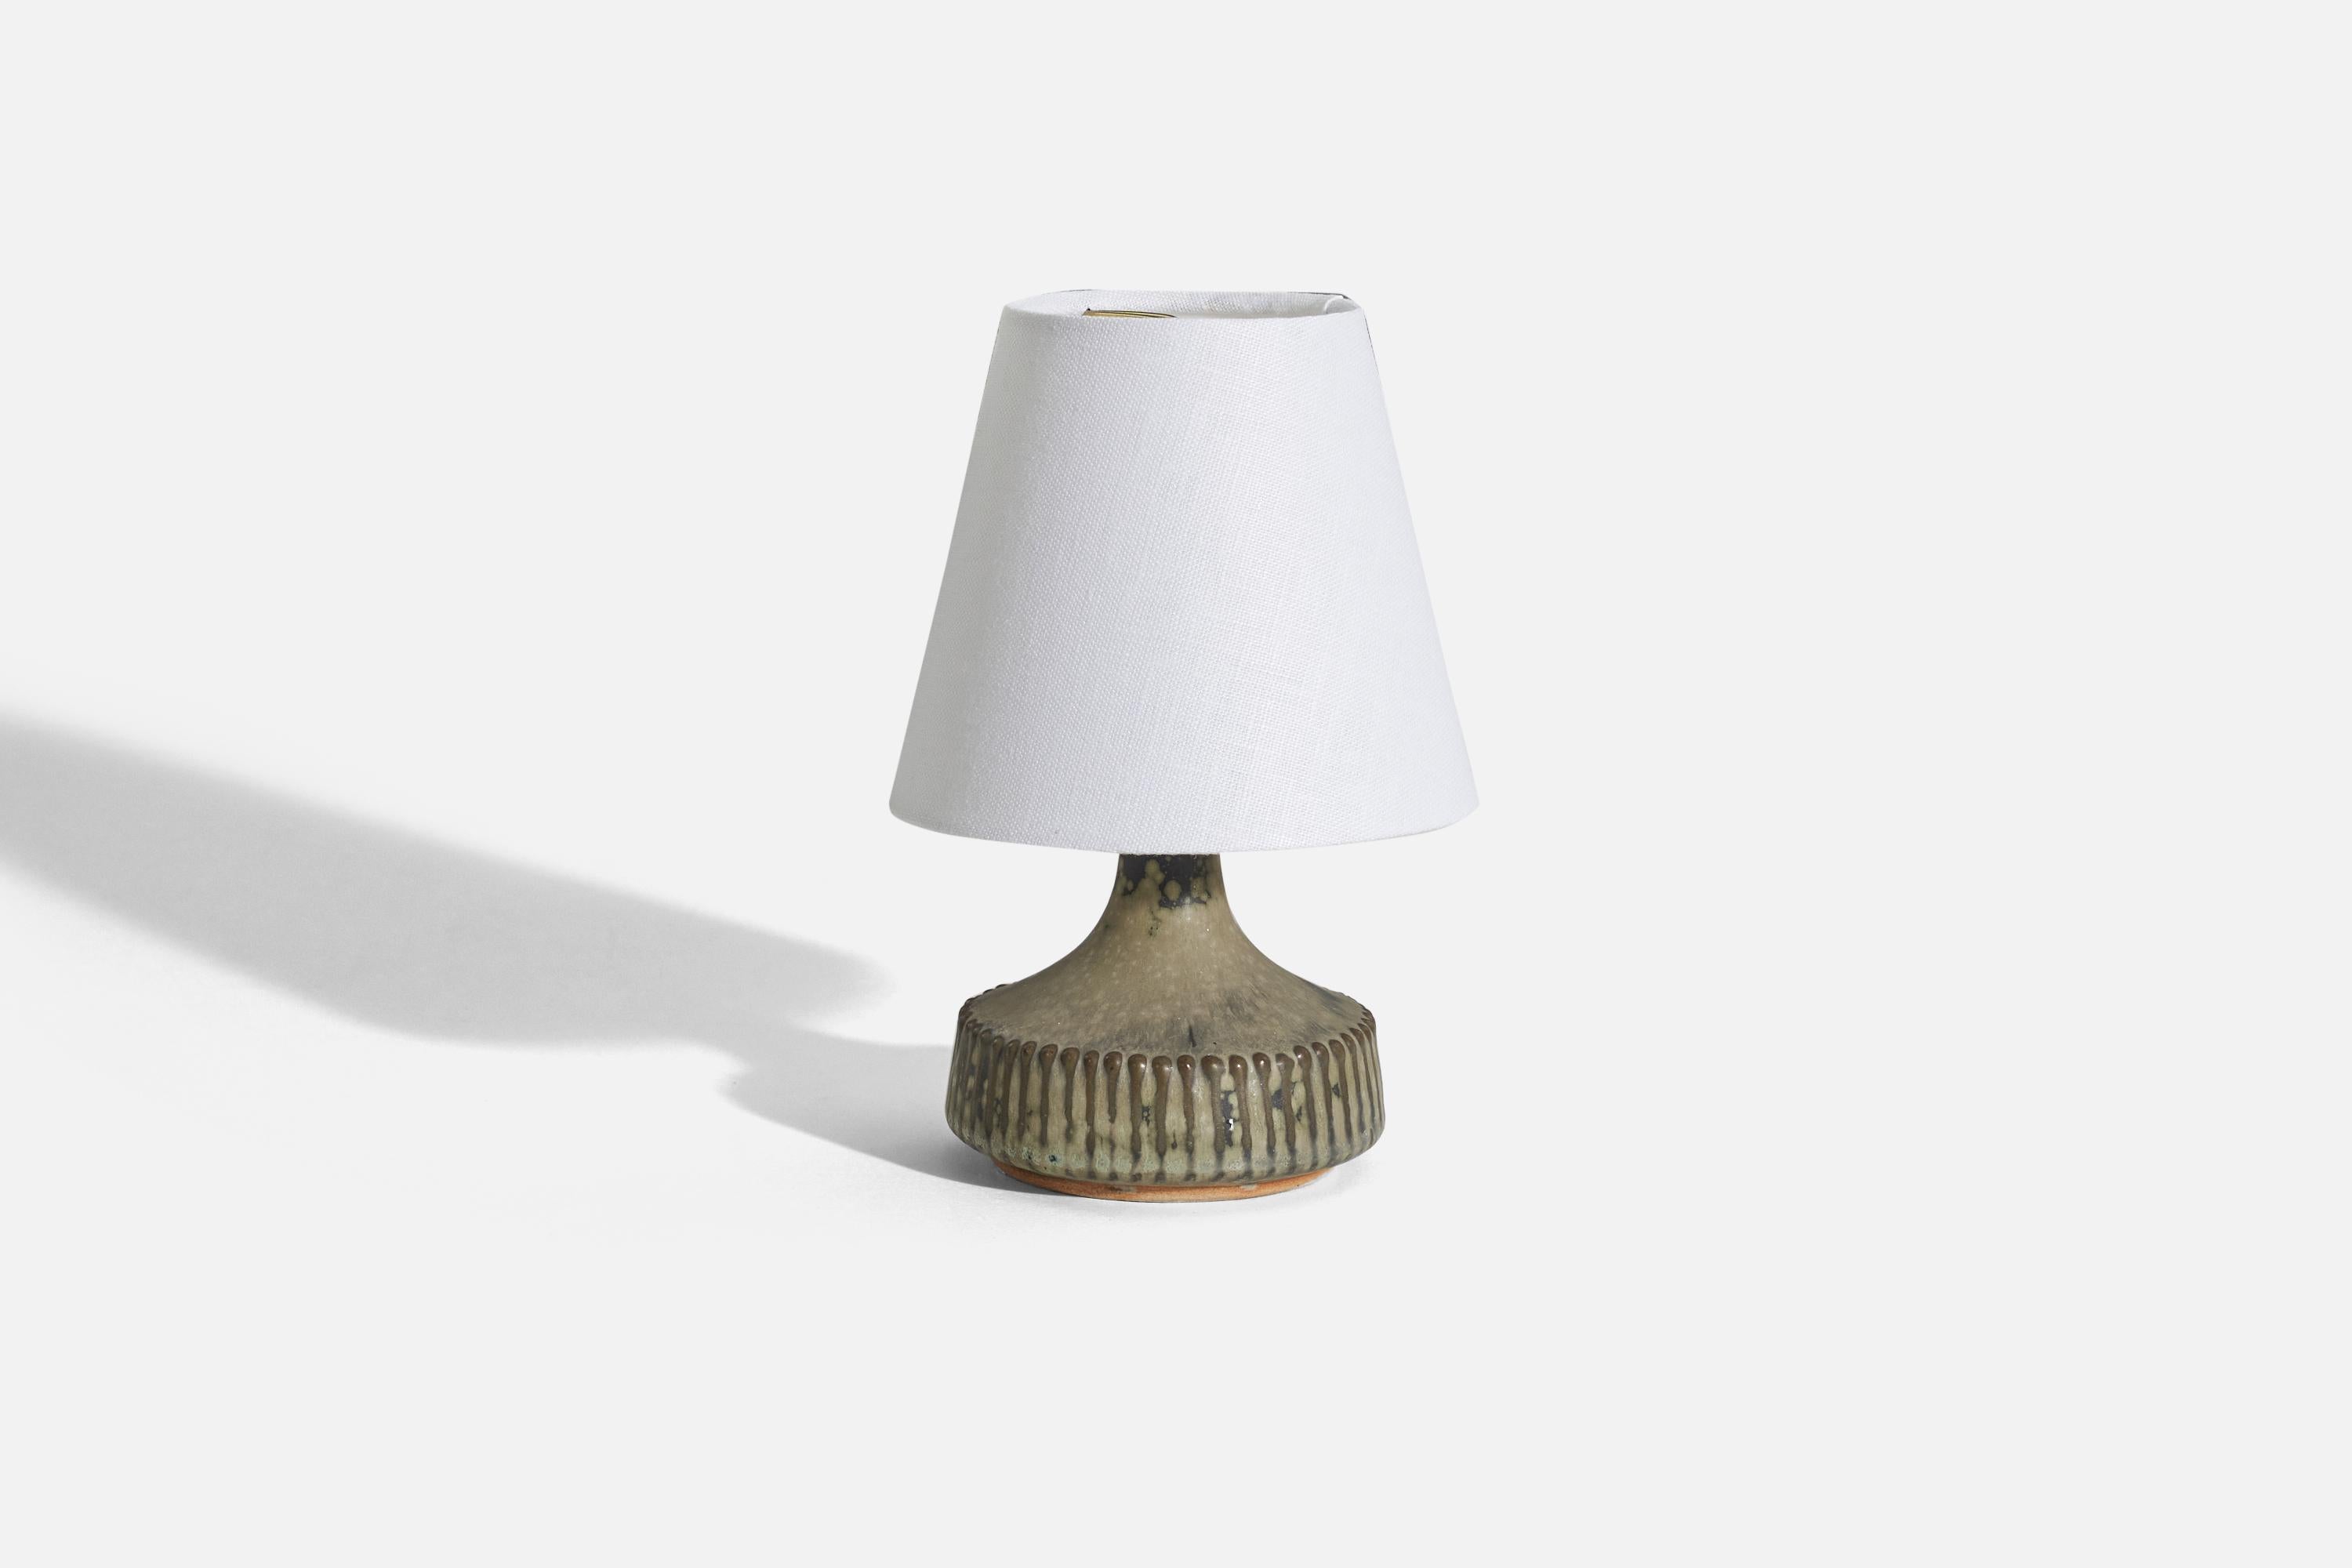 A grey, glazed stoneware table lamp. Produced and designed by Rolf Palm, Sweden, c. 1960s. 

Sold without lampshade. 
Dimensions of Lamp (inches) : 5.125 x 3.75 x 3.75 (H x W x D)
Dimensions of Shade (inches) : 3.125 x 5.125 x 4.4375 (T x B x